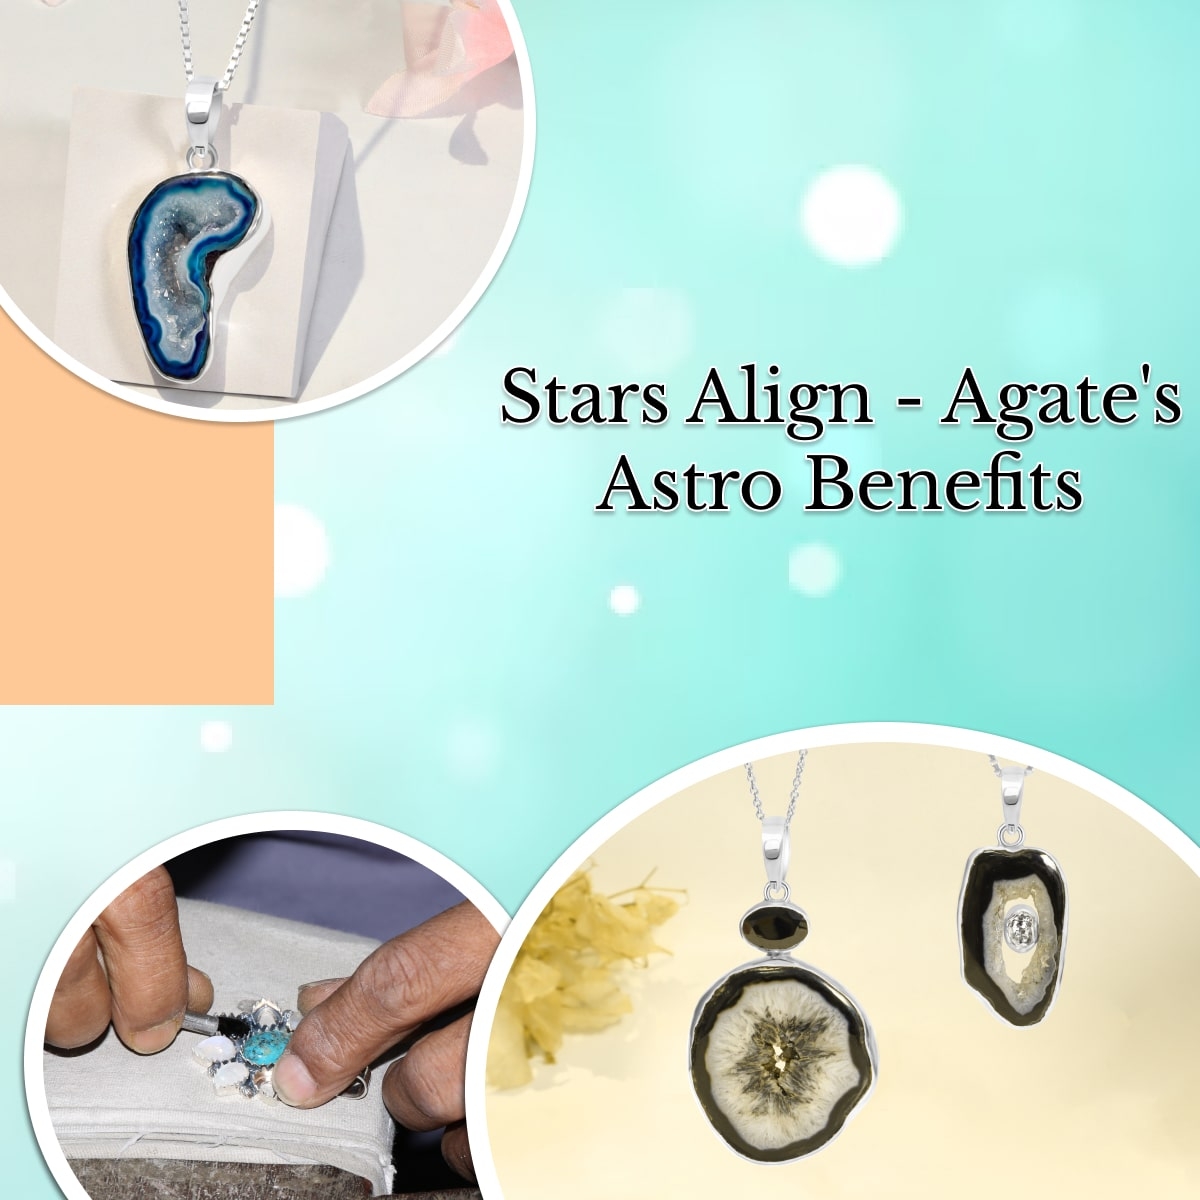 Some of the Astrological Benefits of Agate Gemstone